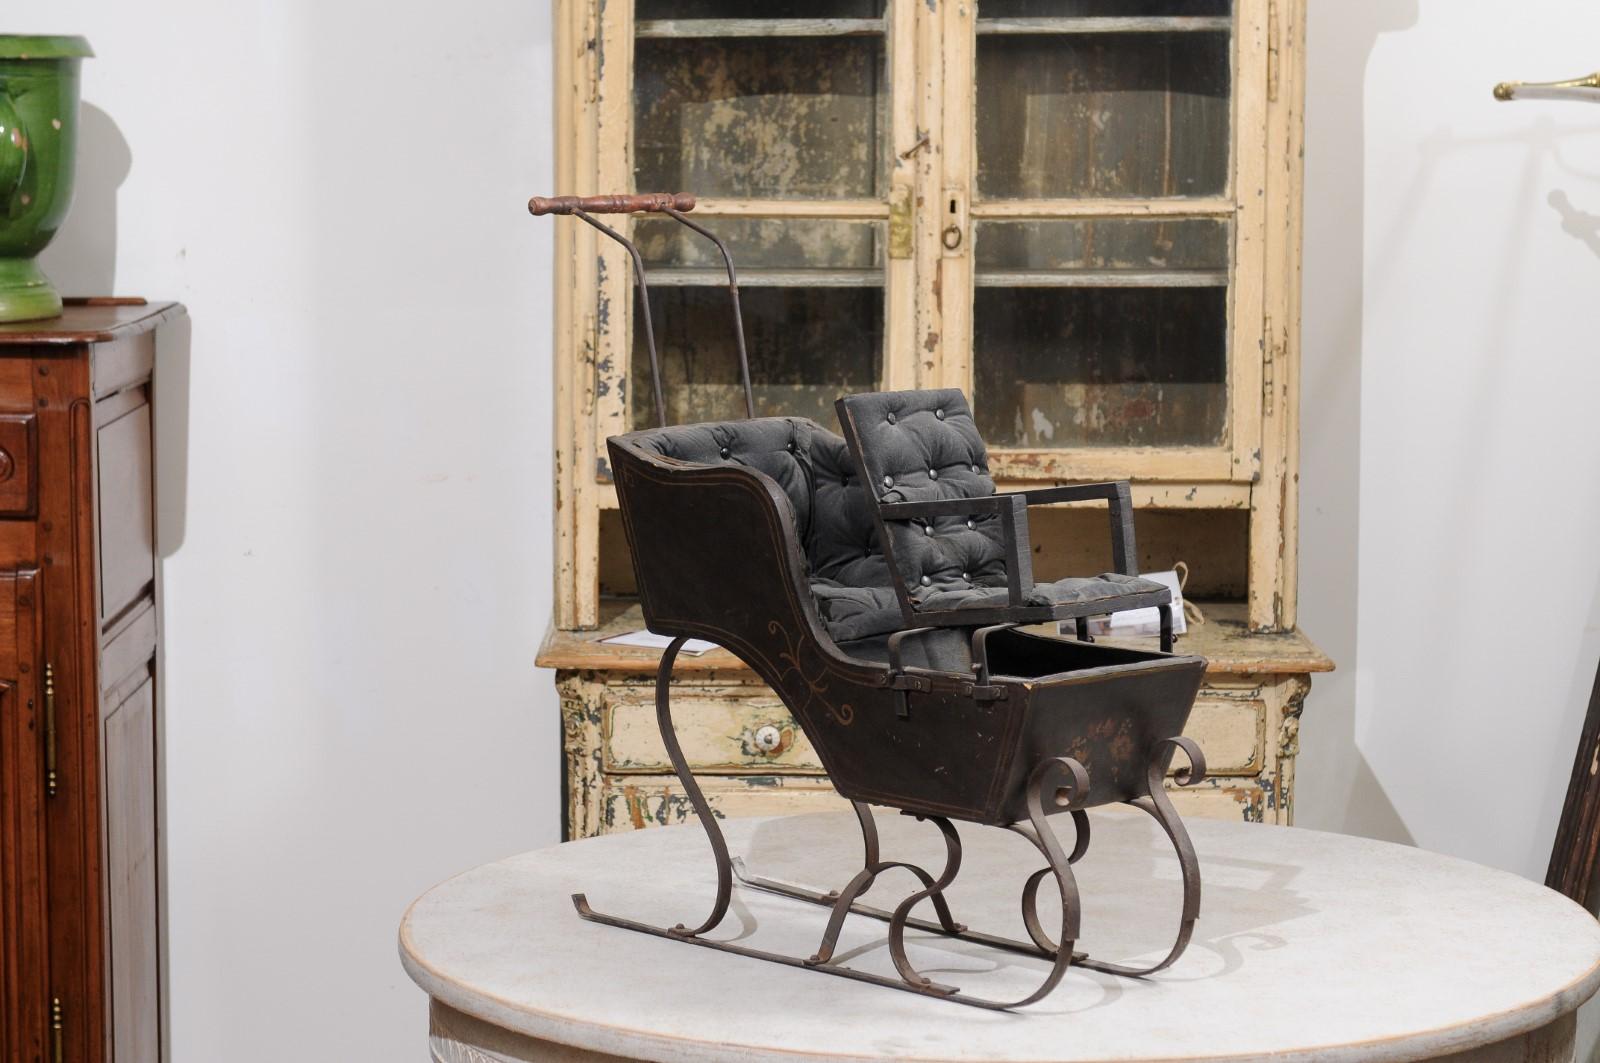 A French child's sleigh from the 19th century, with tufted upholstery and floral painted décor. Created in France during the 19th century, this child's sleigh charms us with its petite proportions and graceful lines. Boasting a dark patina, the